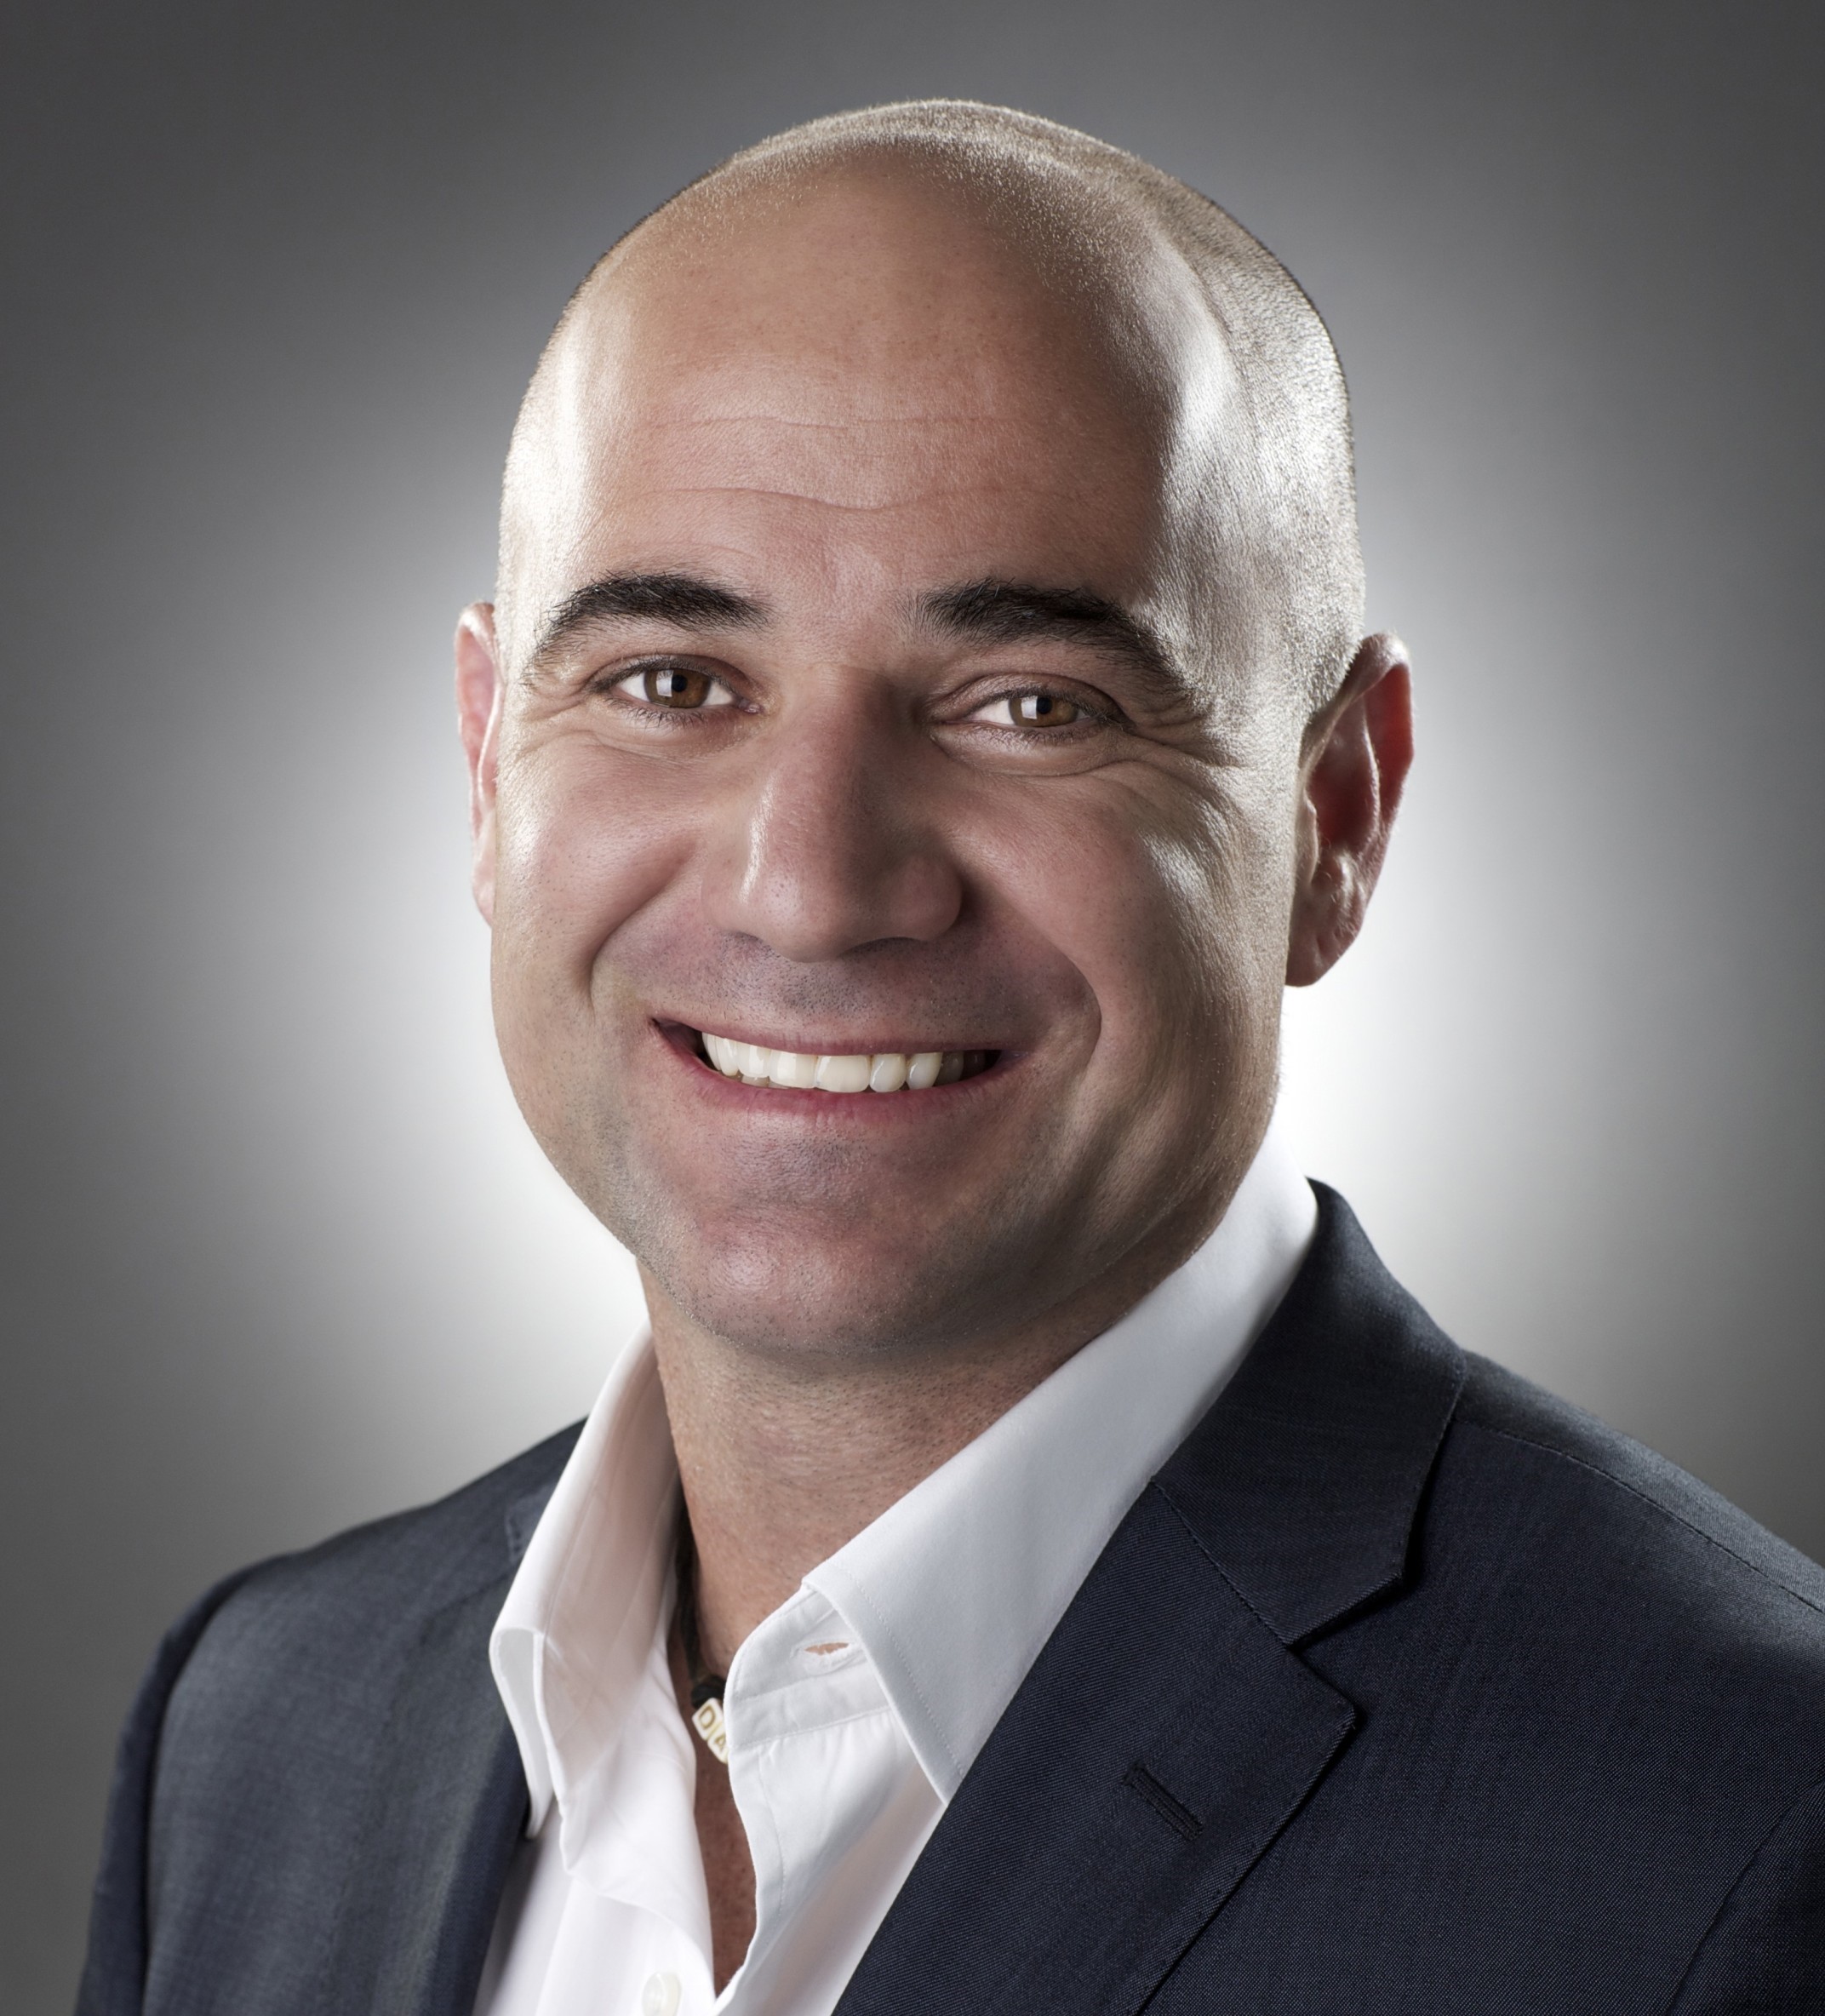 Andre Agassi Speaking Fee and Booking Agent Contact